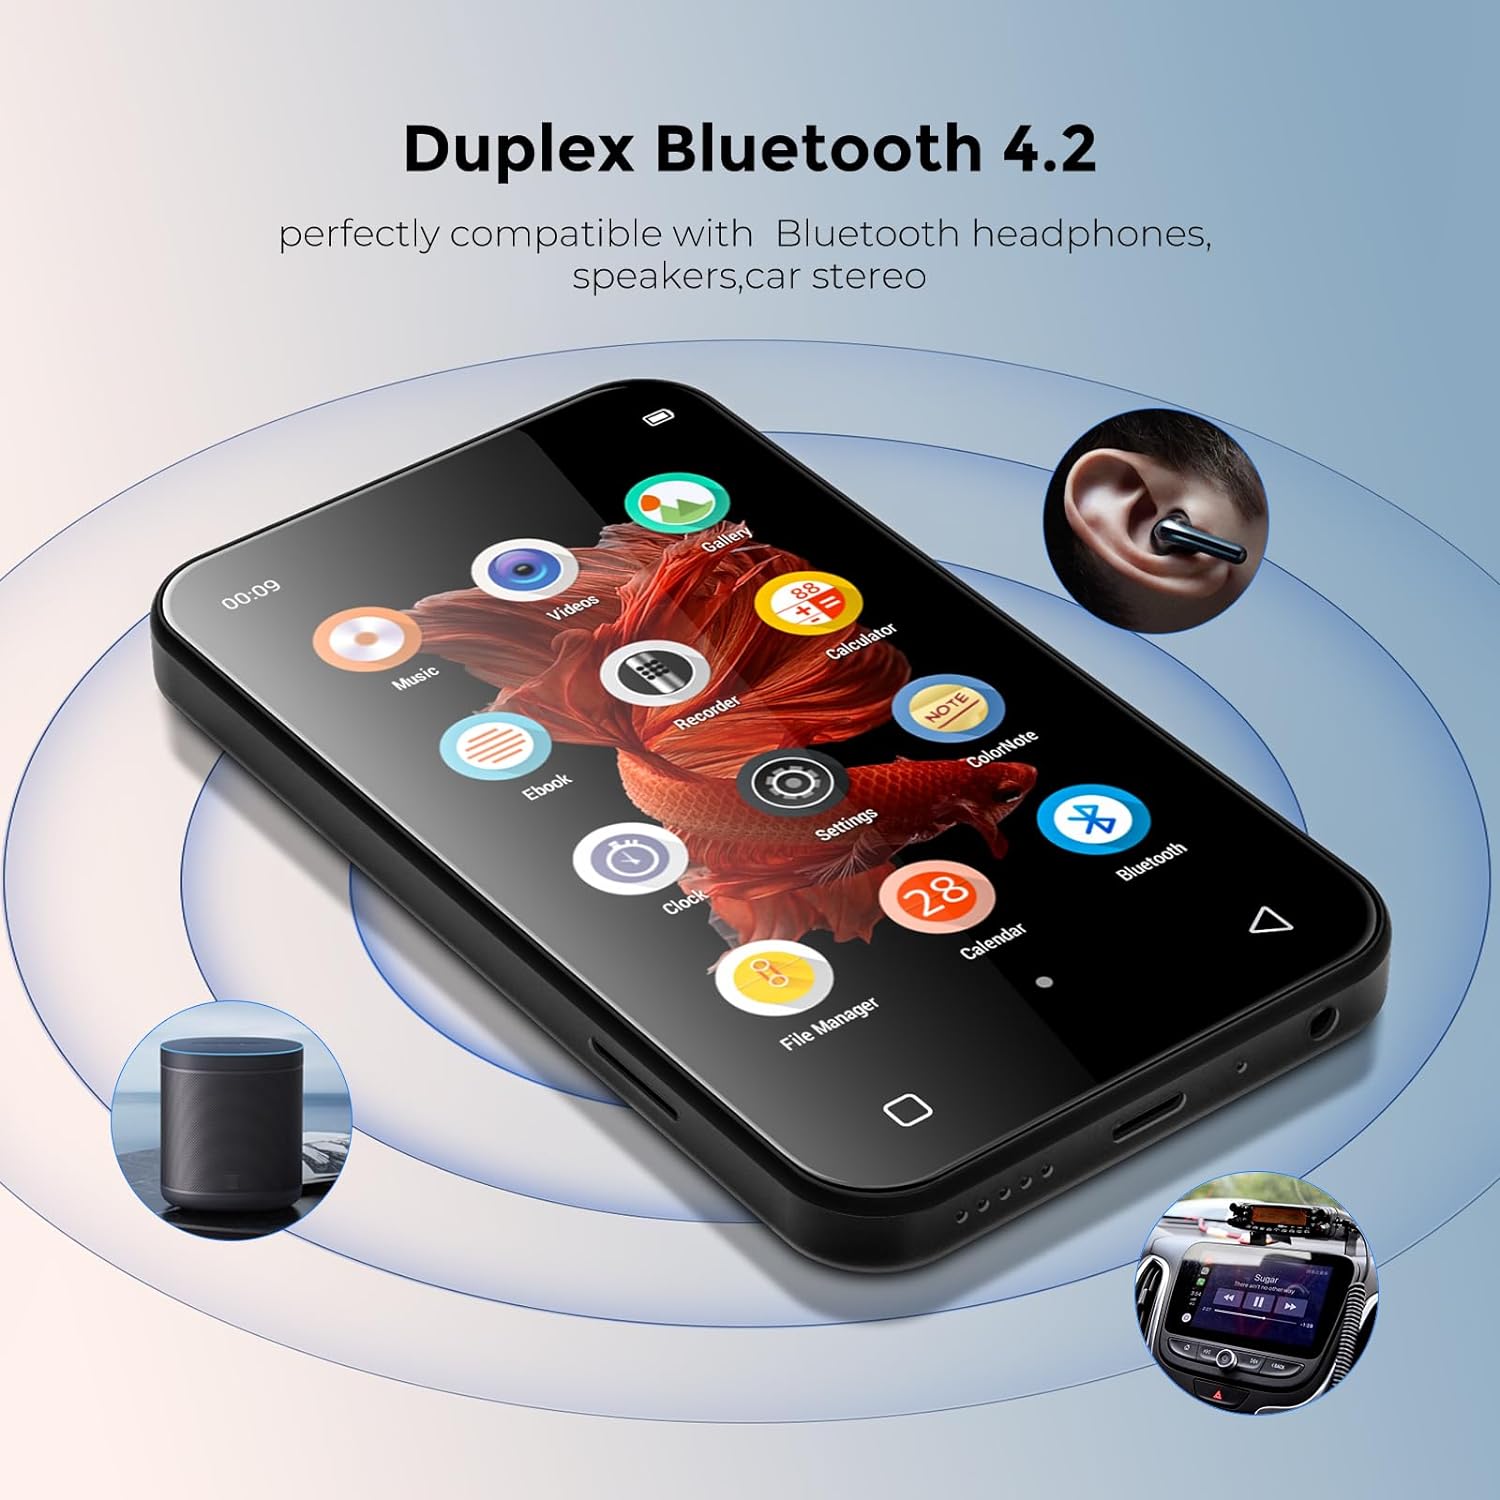 TIMMKOO 72GB MP3 Player with Bluetooth, 4.0" Full Touchscreen Mp4 Mp3 Player with Speaker, Portable HiFi Sound Mp3 Player with Bluetooth, Voice Recorder, E-Book, Supports up to 512GB TF